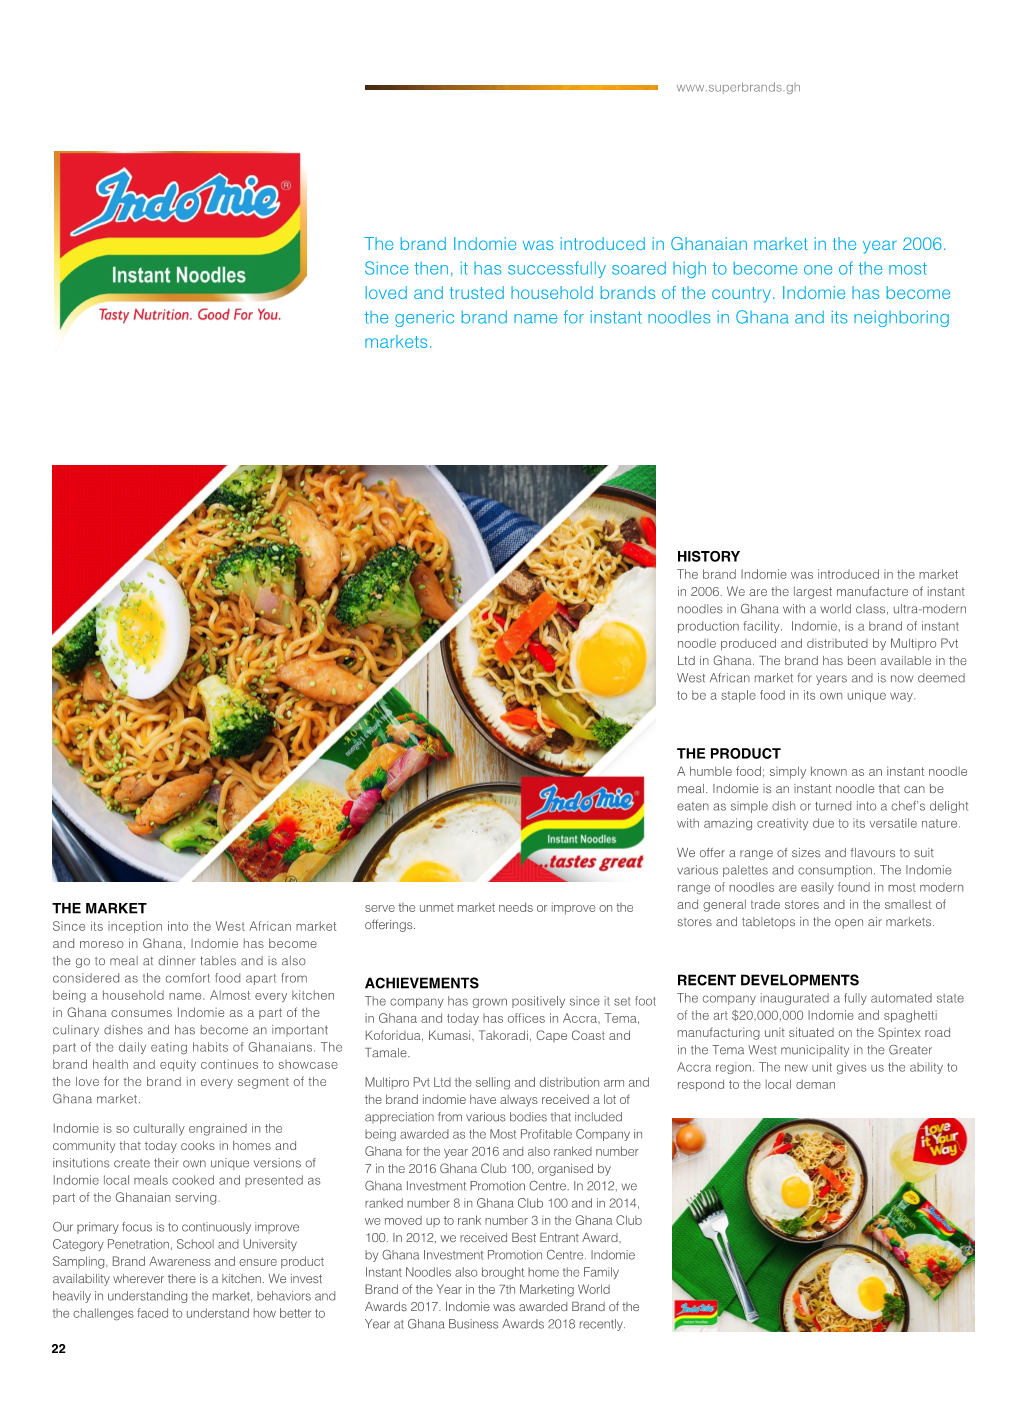 The Brand Indomie Was Introduced in Ghanaian Market in the Year 2006